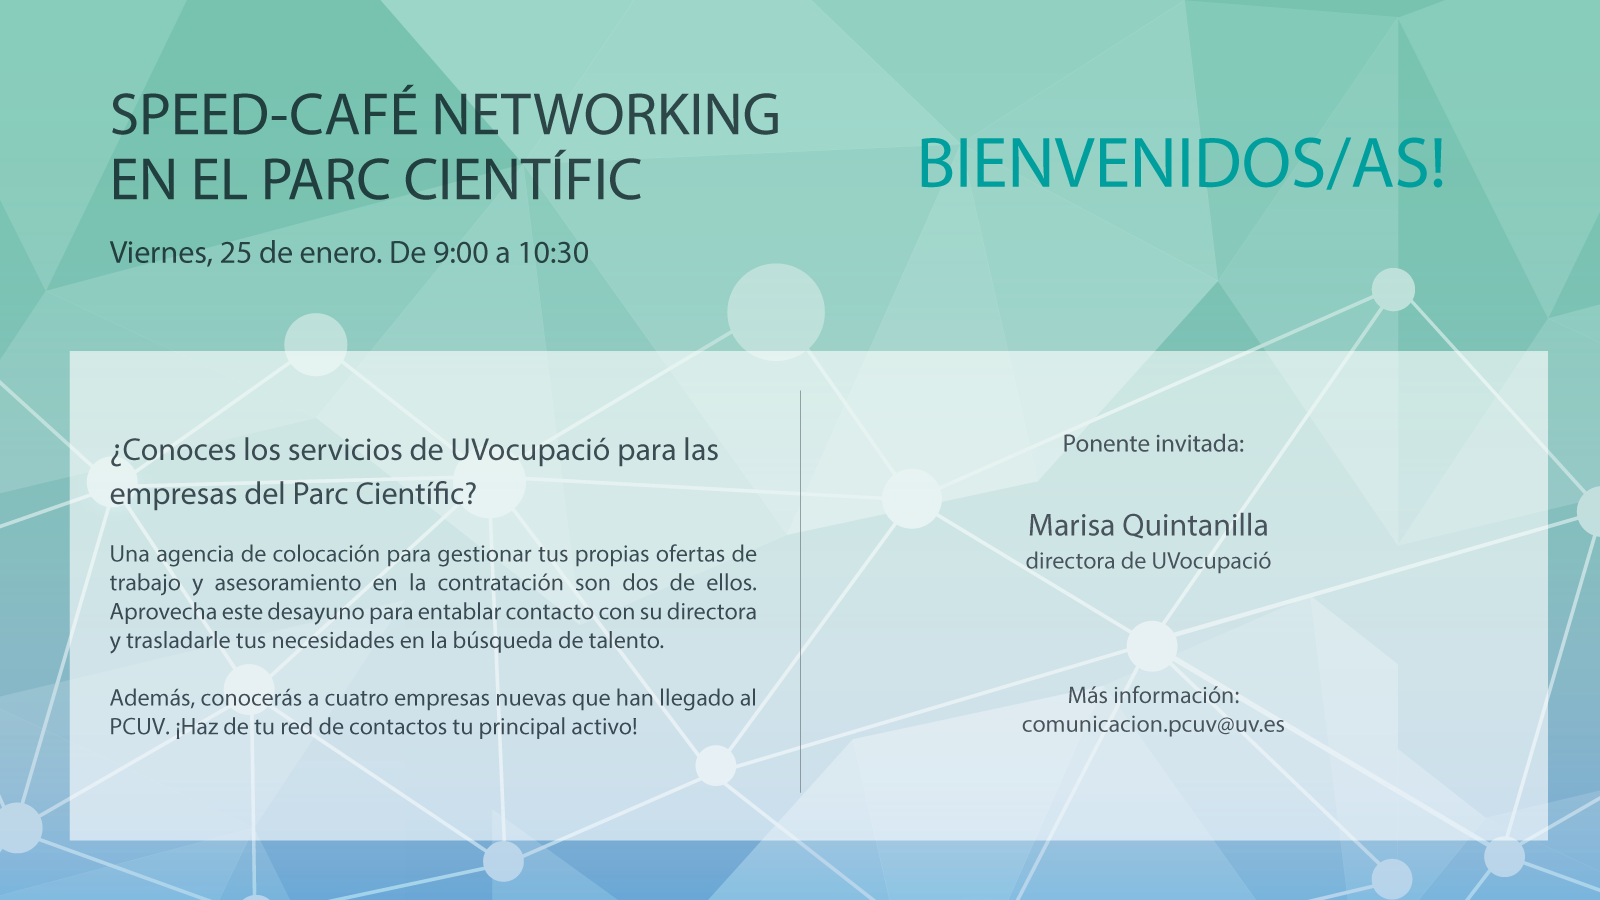 Speed-Café Networking with UVocupacio